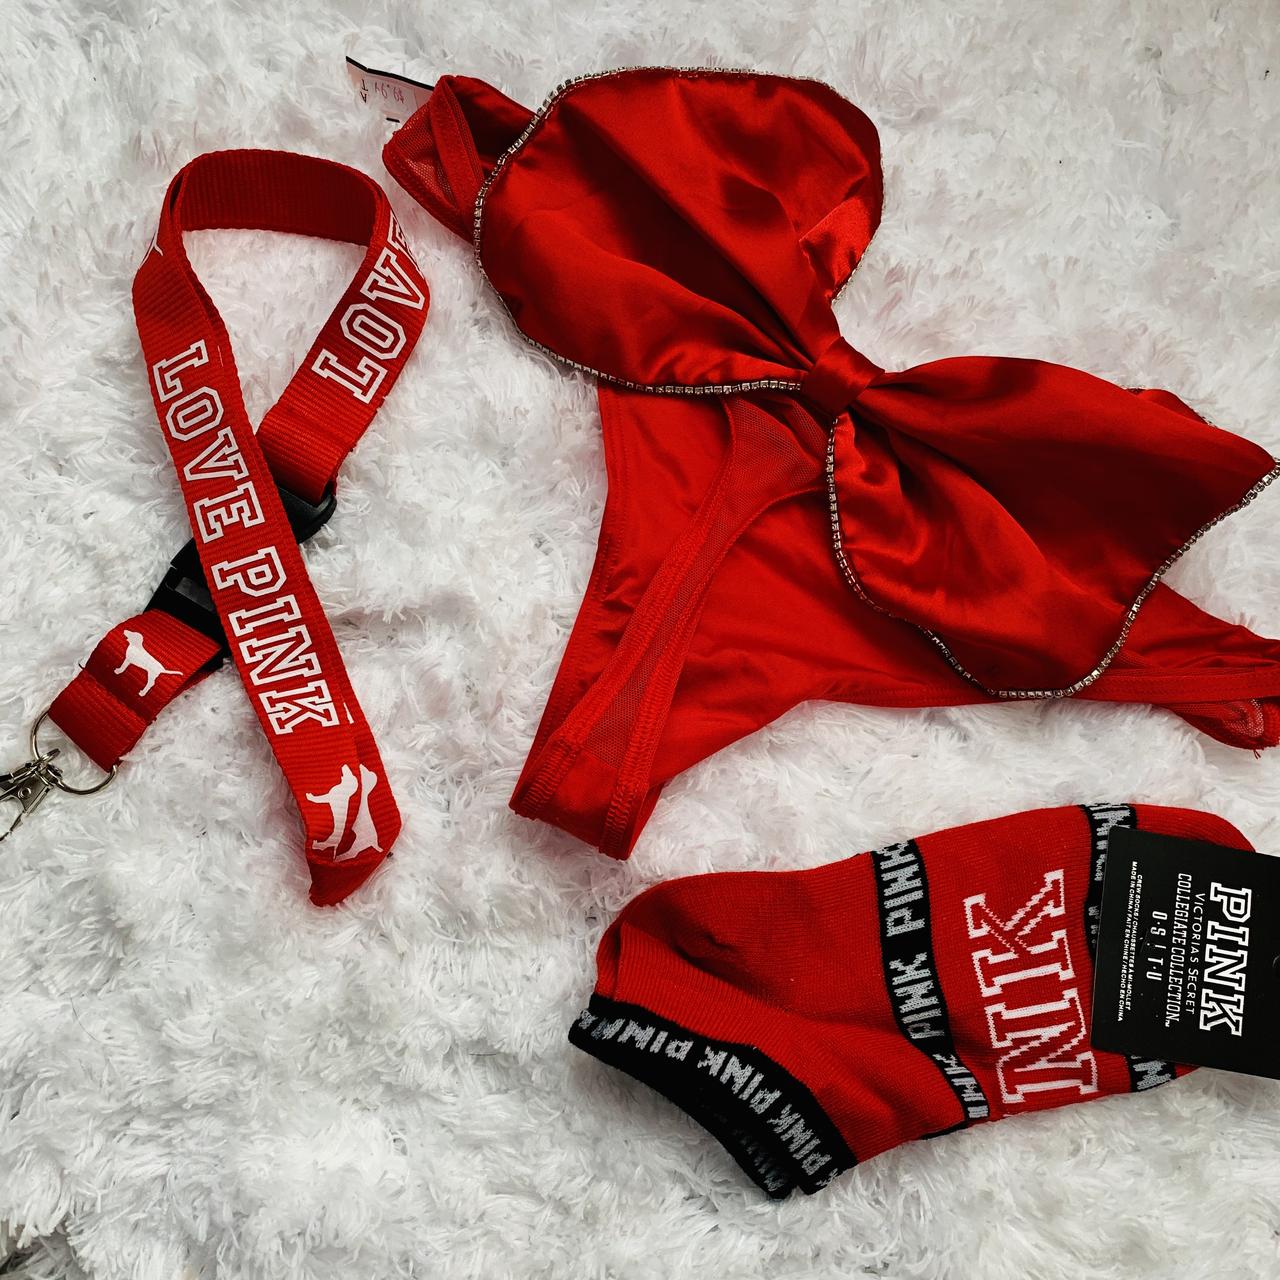 NWT Red Christmas thong #victoriasecret #pink - Depop